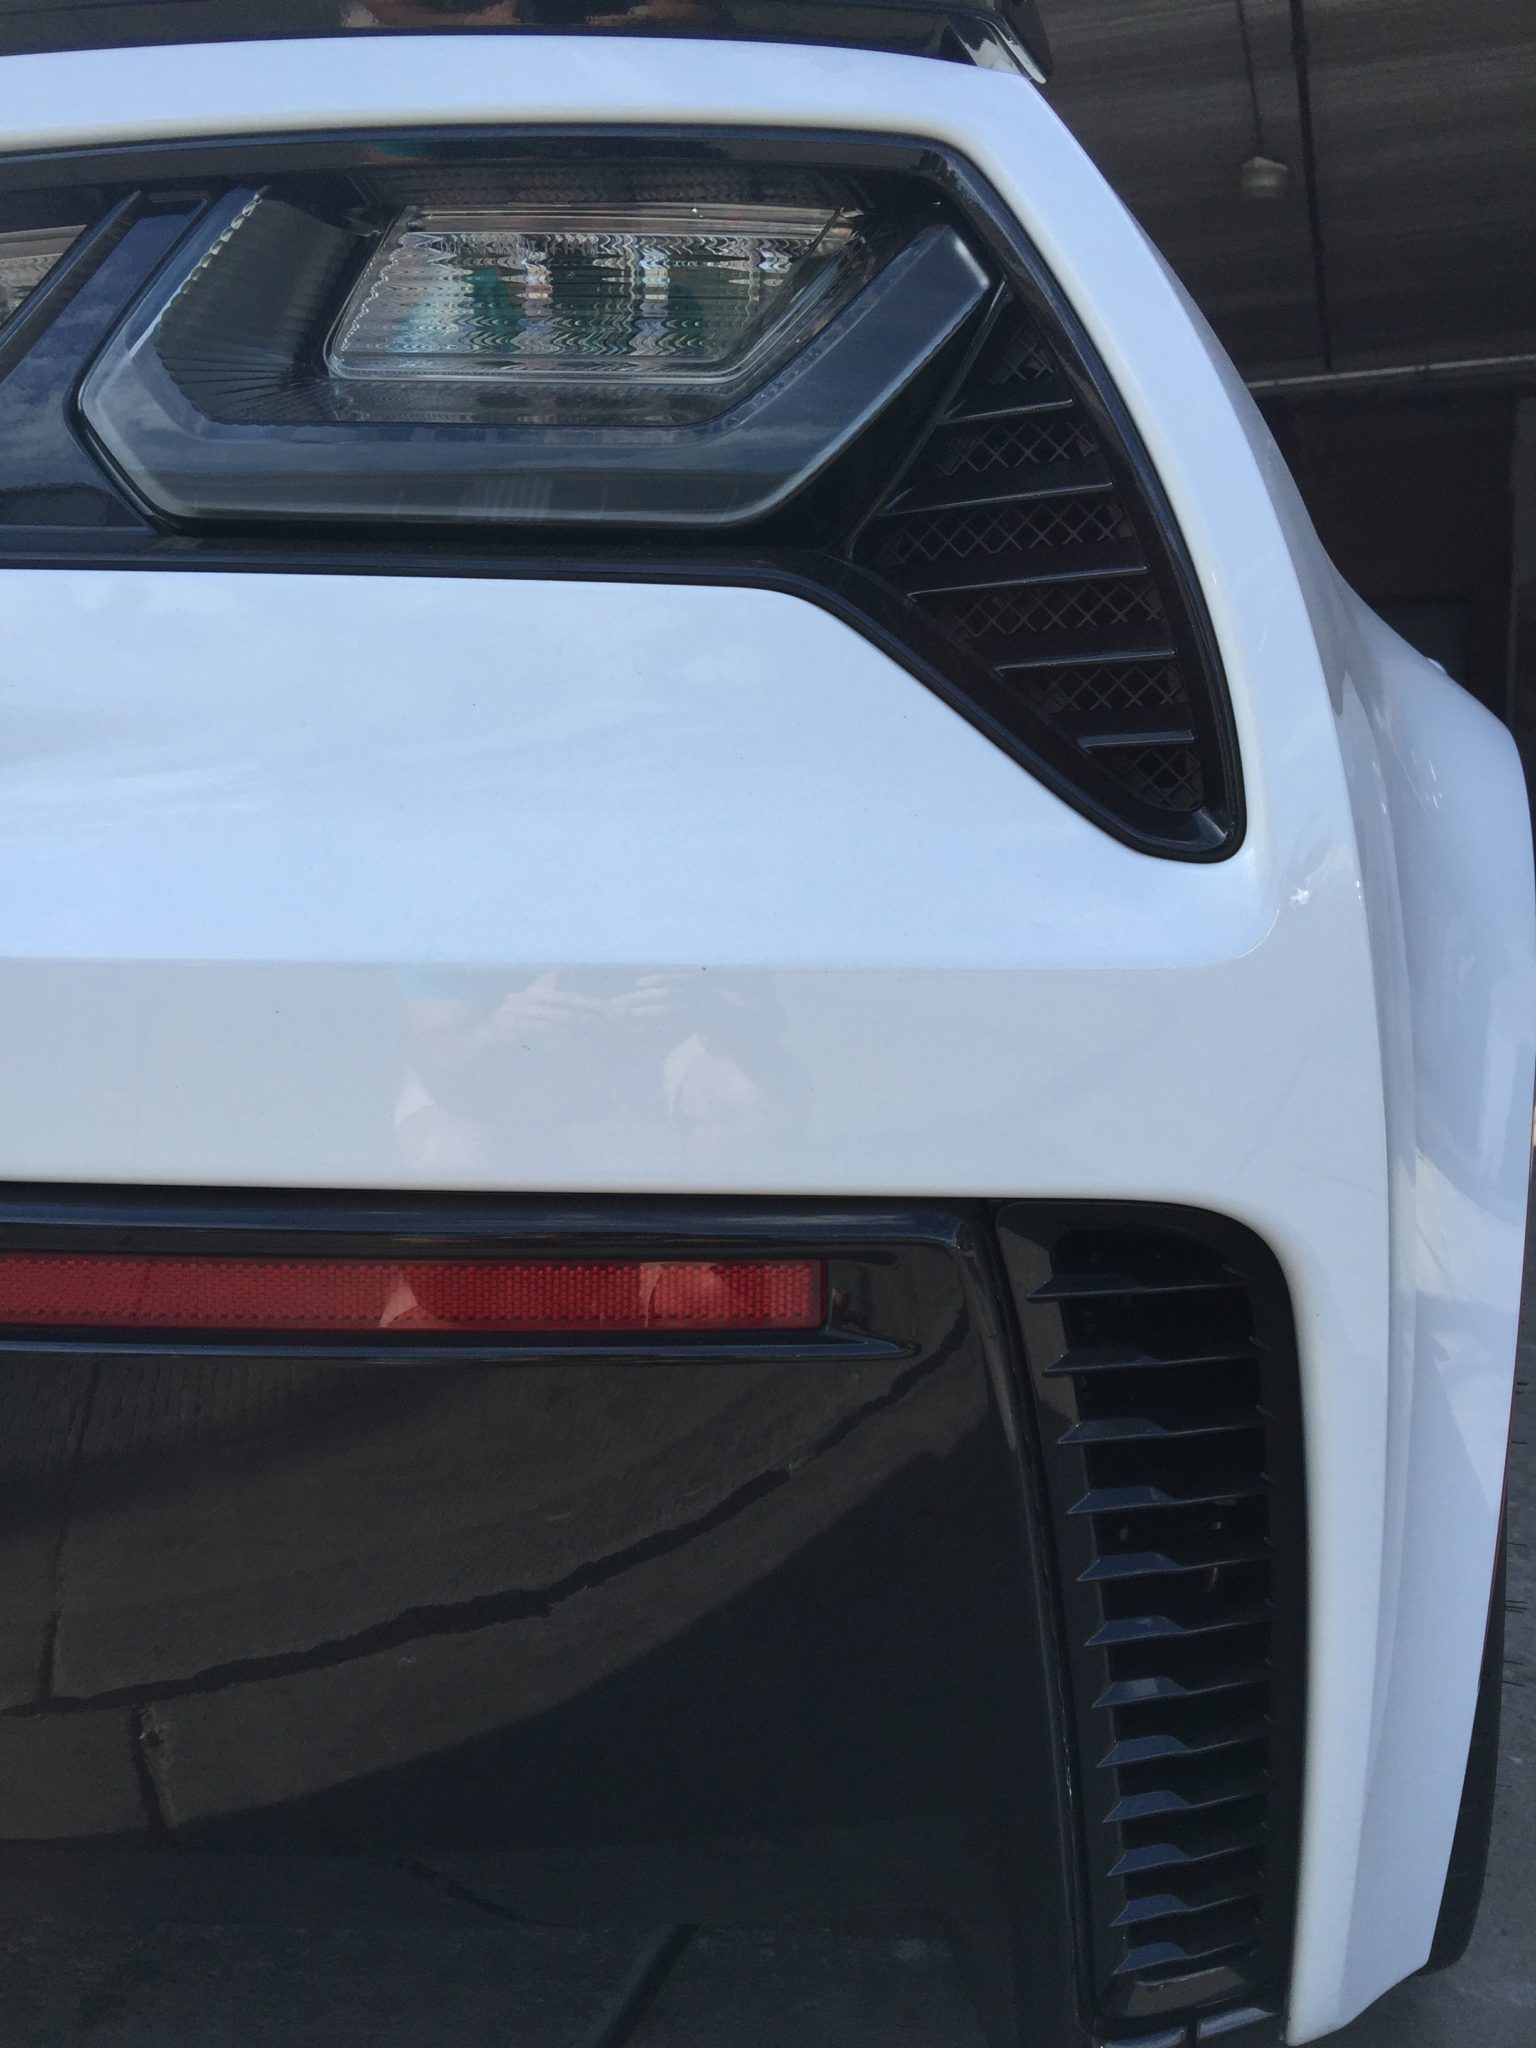 photo Rear Taillights of the wide body Z06 xtreme xperience